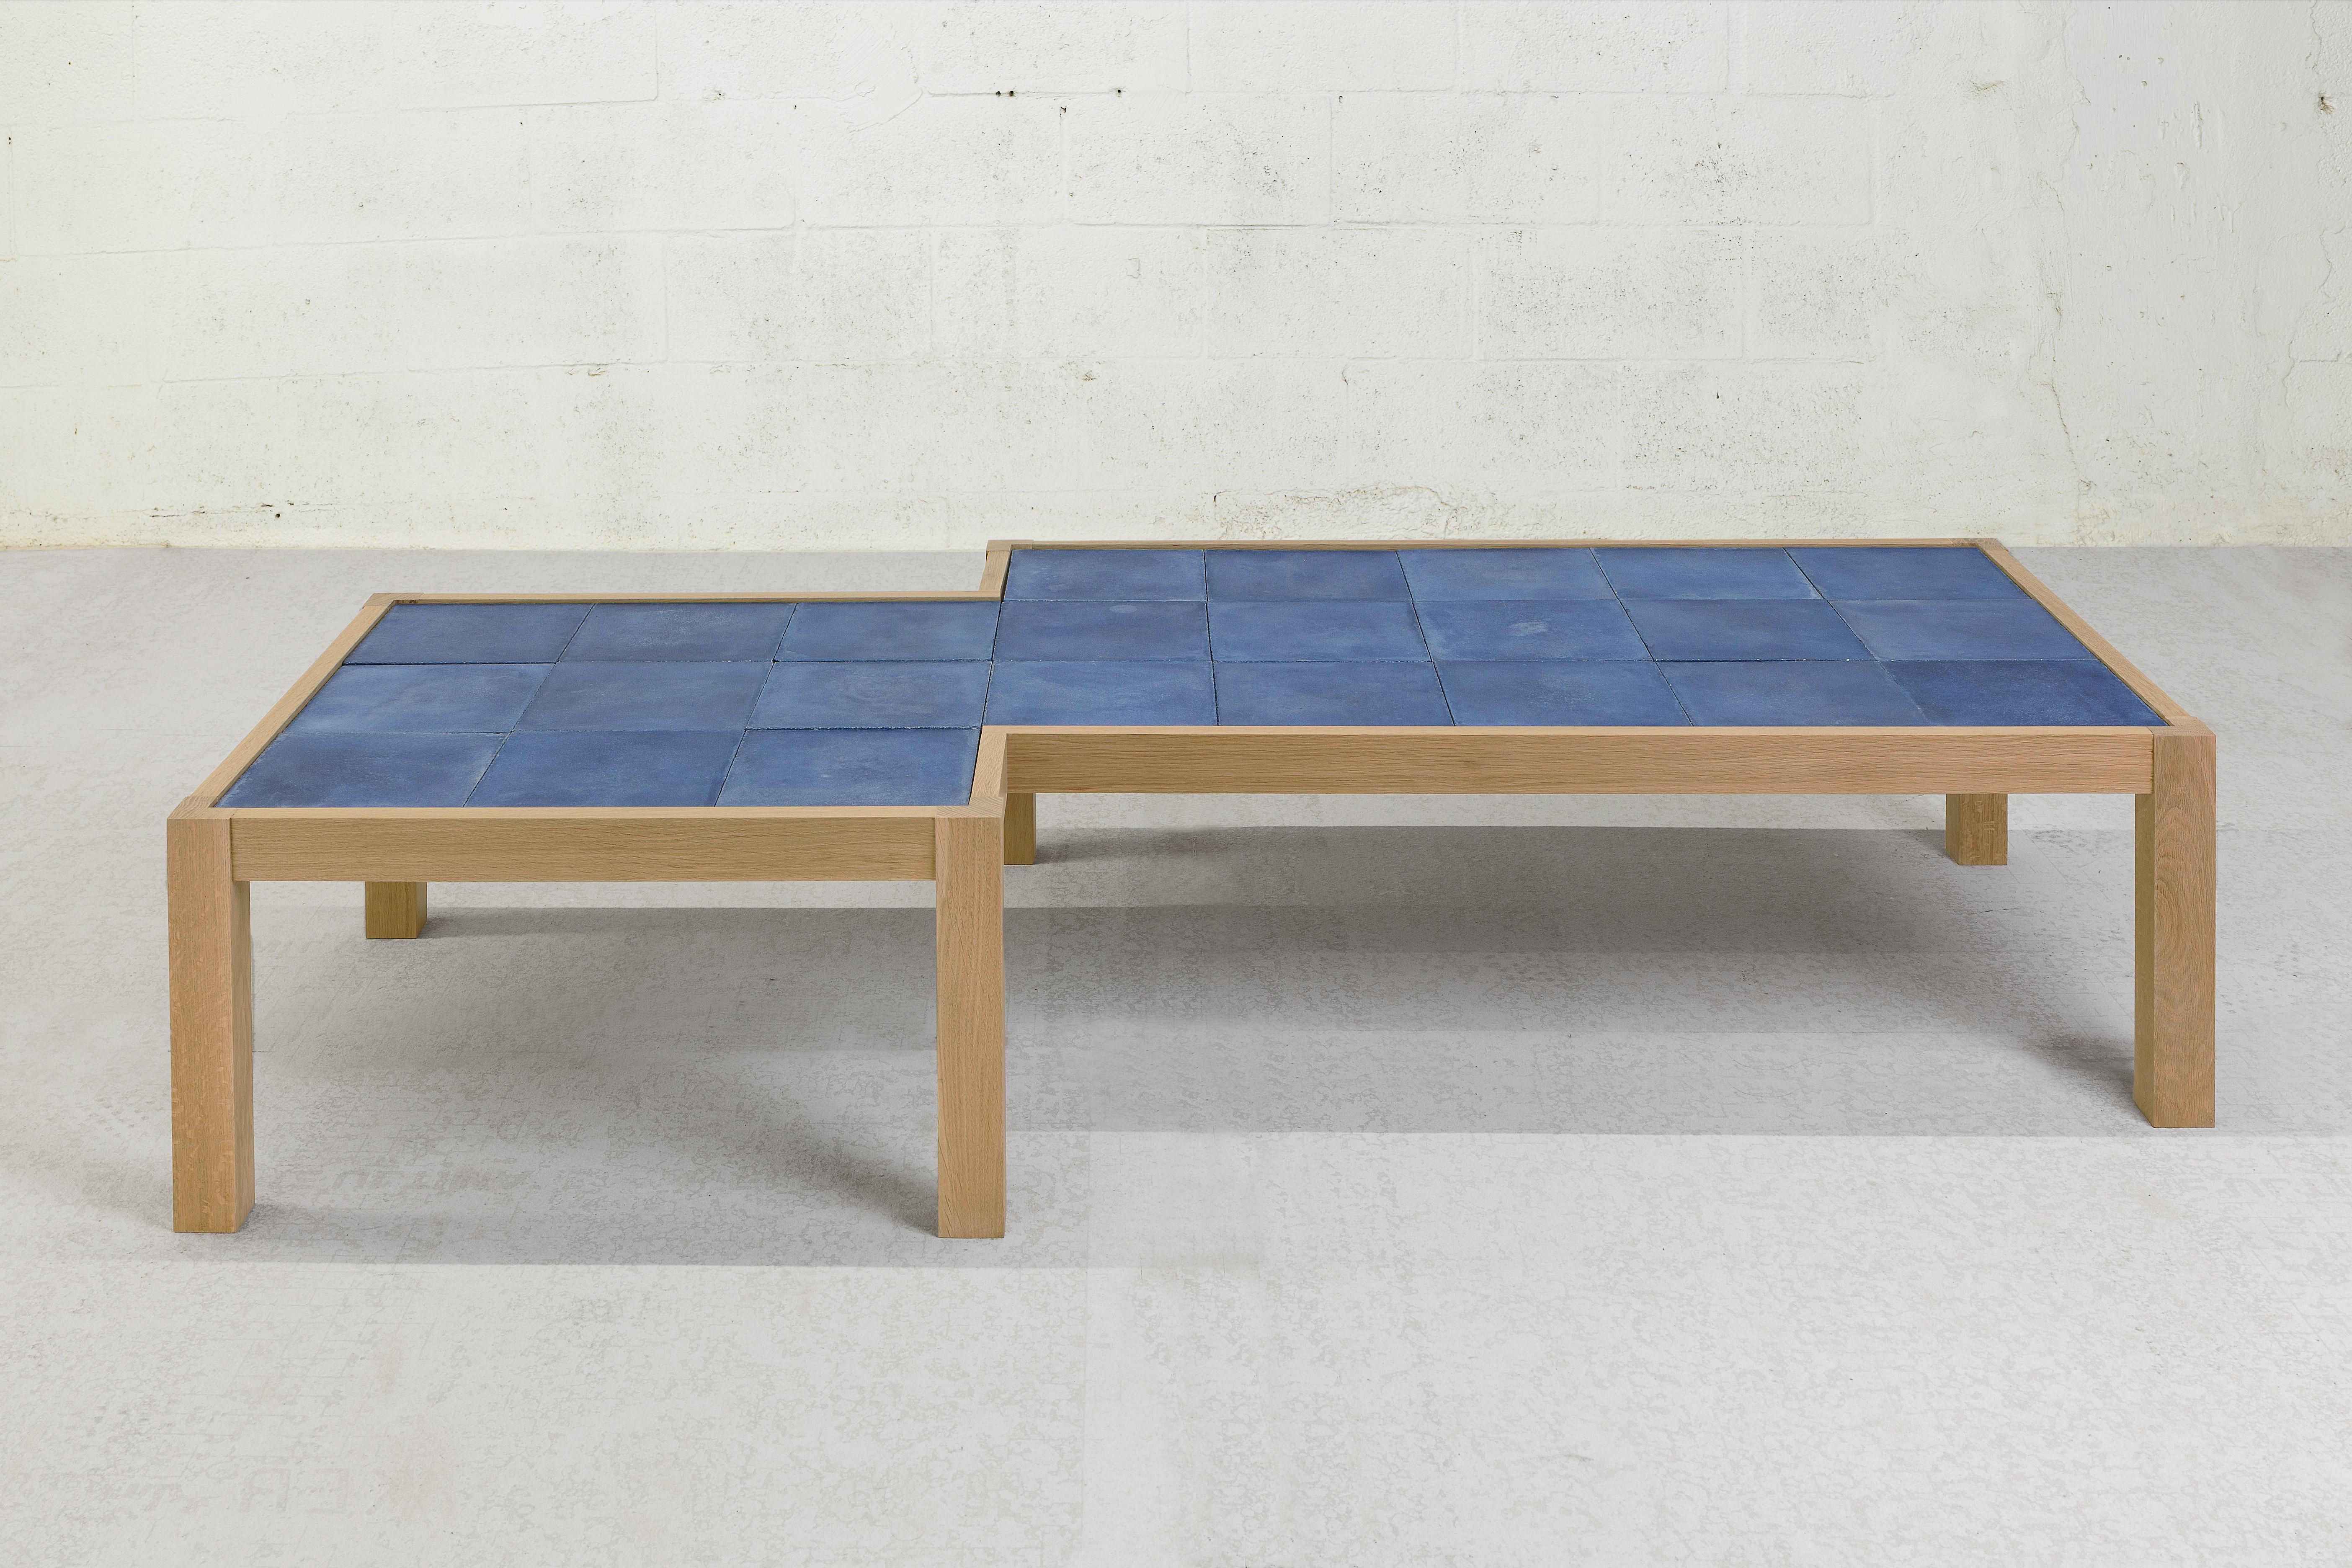 Warm Contemporary Low Table in Natural Oak and Blue Tile by Vivian Carbonell For Sale 2